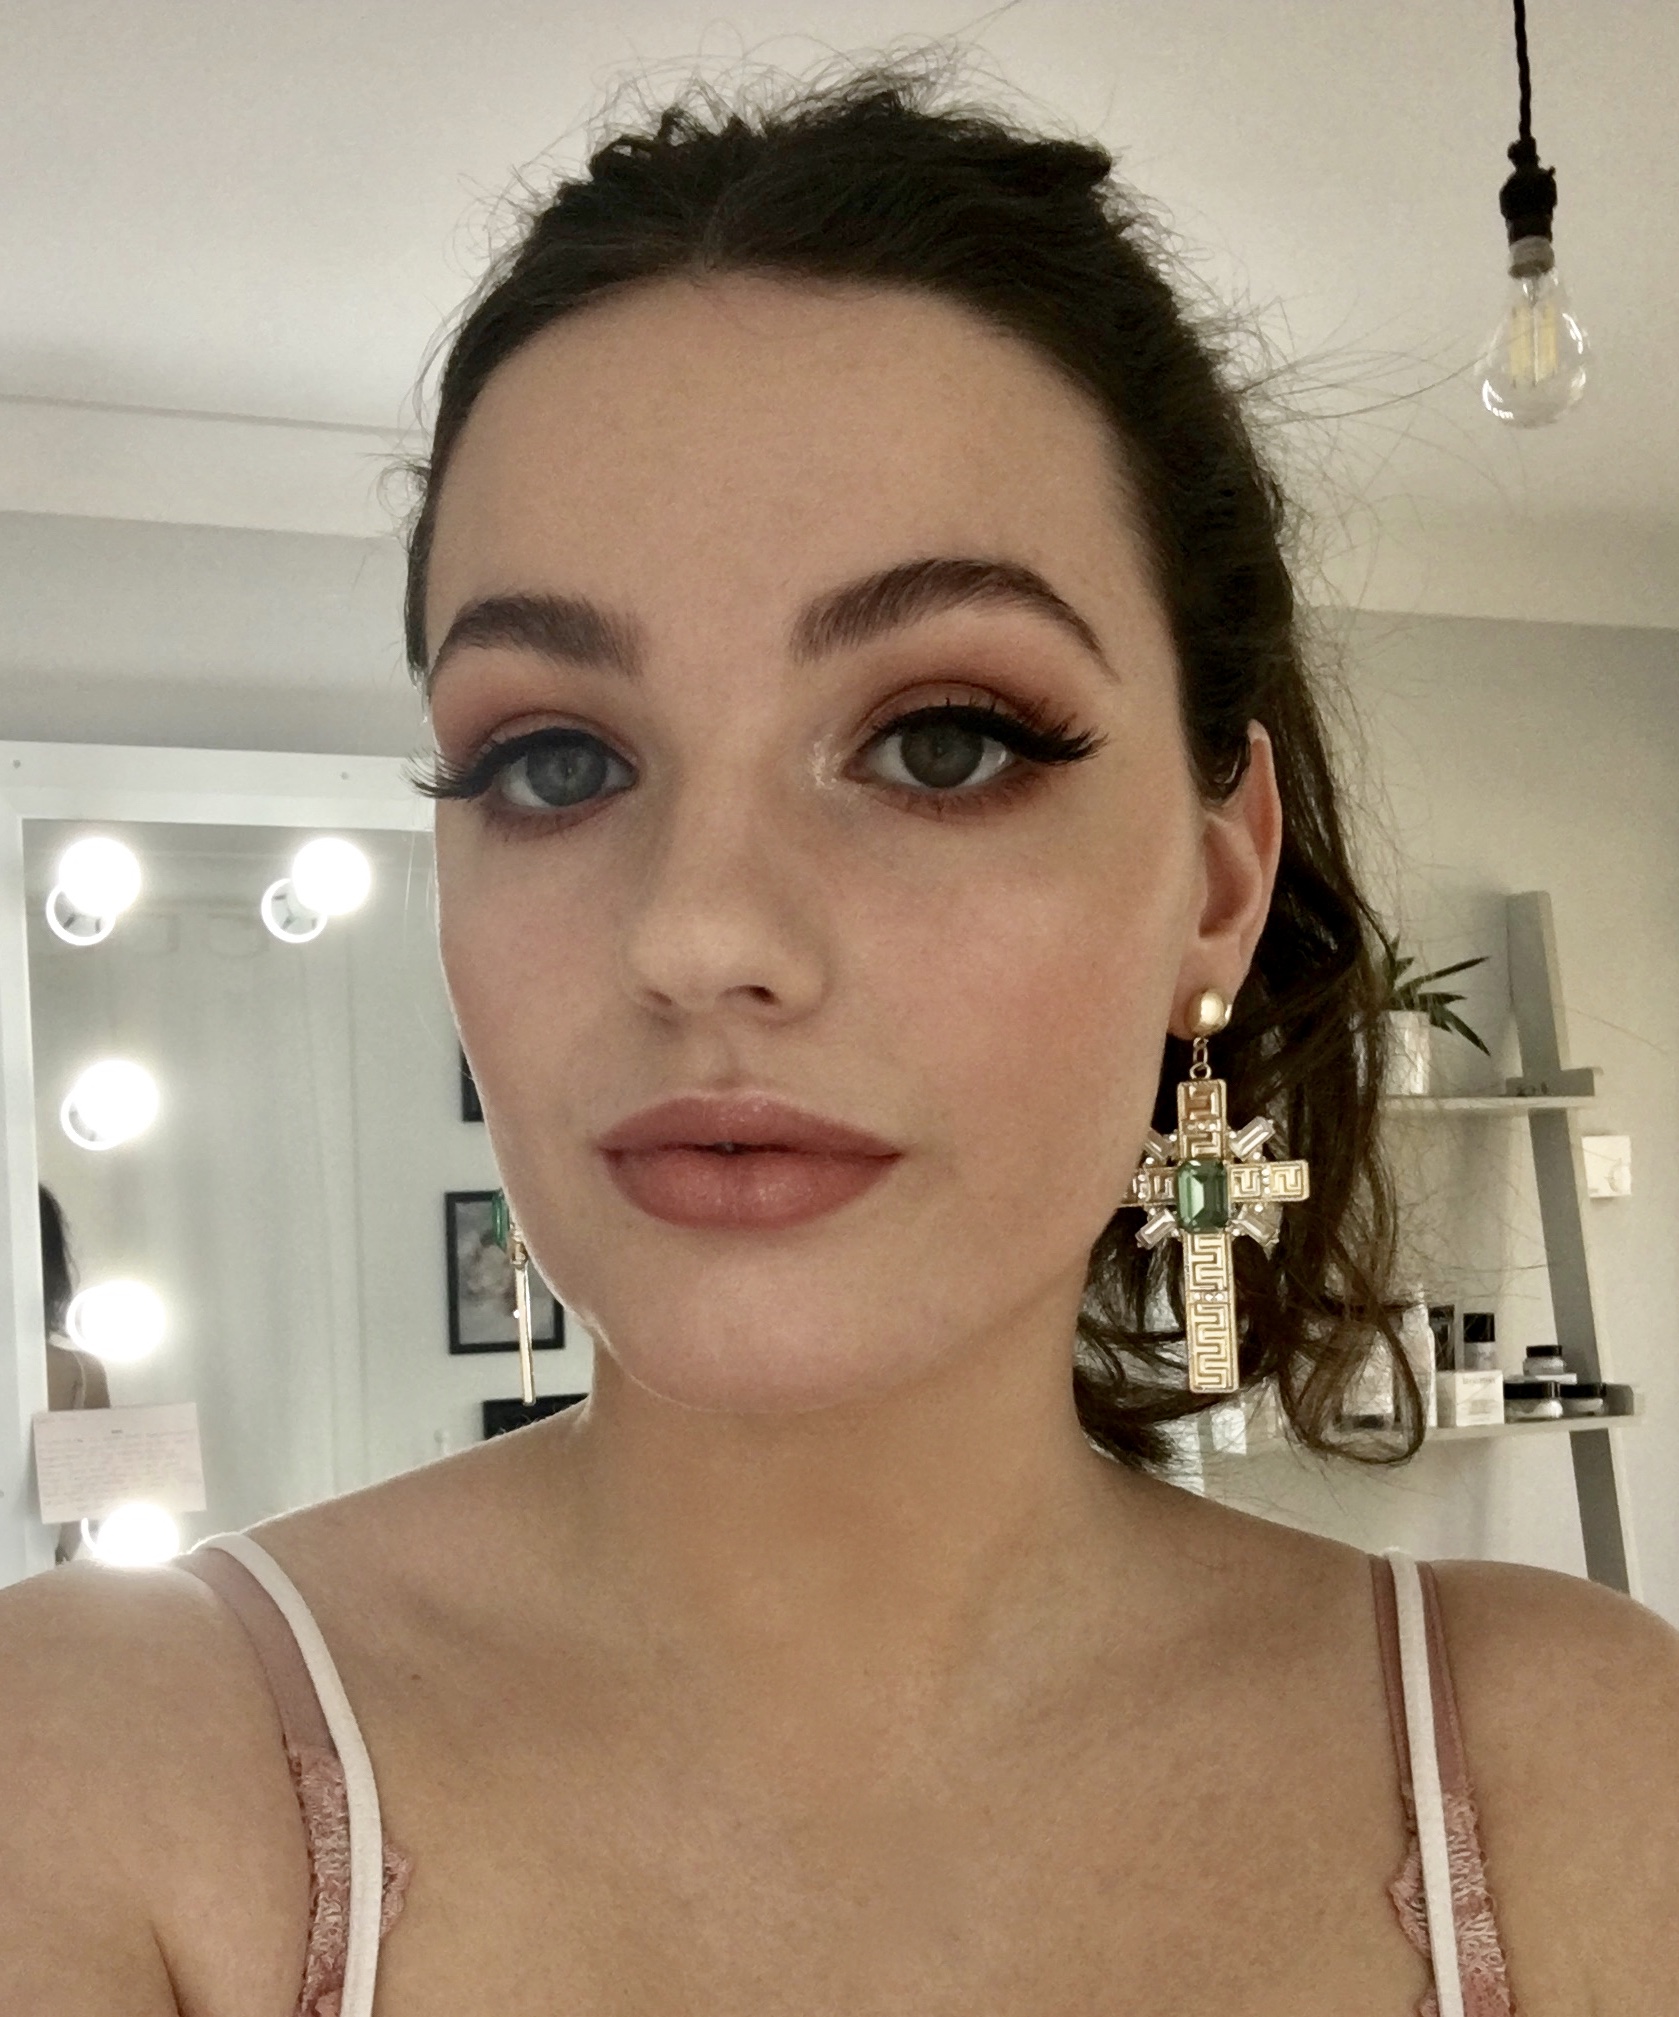 Beautiful Mia - I used the new Charlotte Tilbury Pillow talk palette and lipstick here.